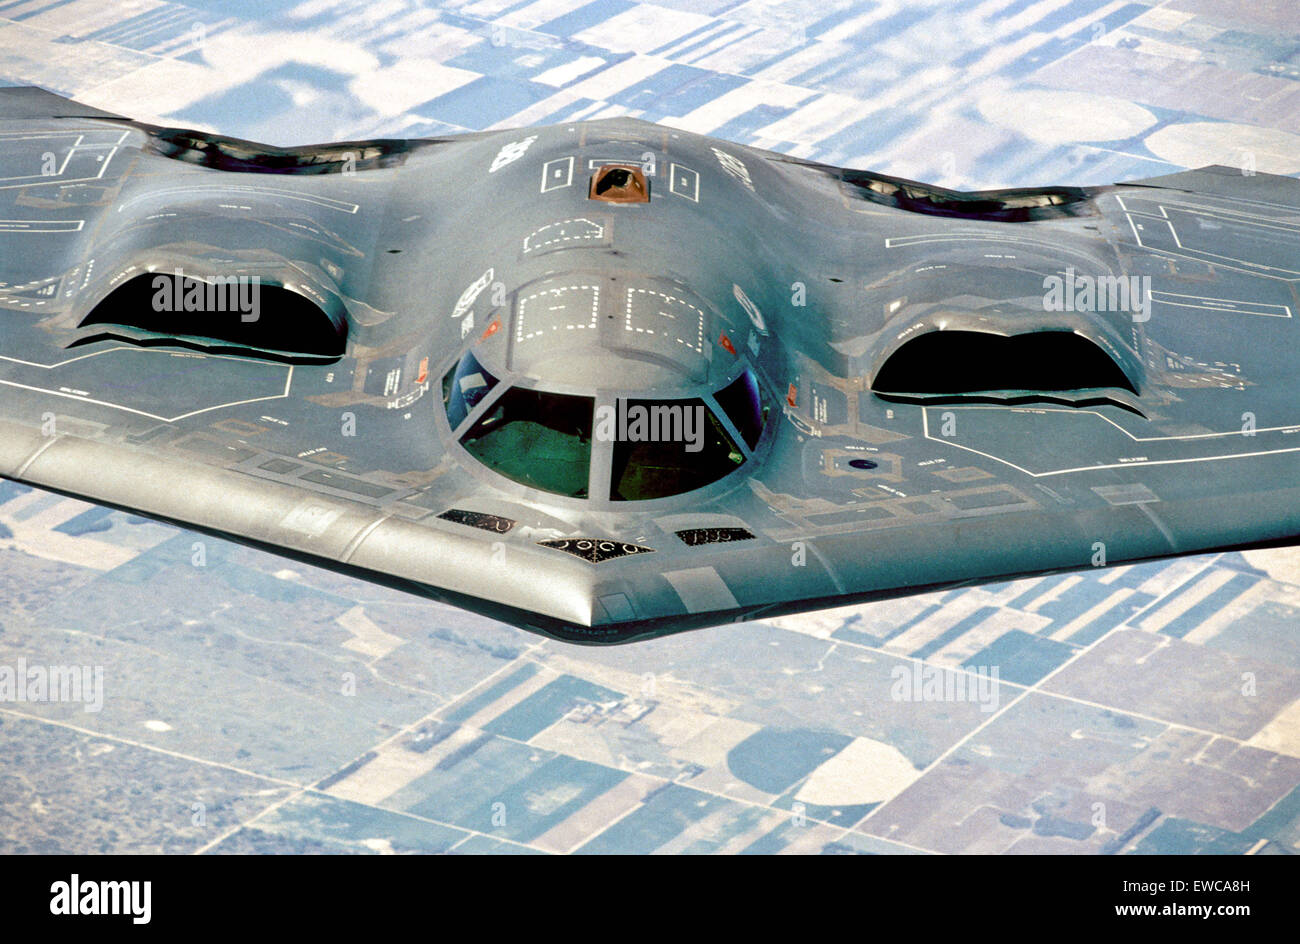 Usa. 17th Sep, 2013. USAF B-2.The public first saw the highly classified B-2 on Nov. 22, 1988, when it rolled out of its hangar at Air Force Plant 42 in Palmdale, Calif. The B-2 first flew on July 17, 1989, at Palmdale, Calif., and Northrop Grumman delivered the first operational B-2 on Dec. 17, 1993. Based at Whiteman Air Force Base, Mo., the B-2 soon demonstrated its combat capabilities in Operation Allied Force over Serbia in 1999, Operation Enduring Freedom over Afghanistan in 2001, and Operation Iraqi Freedom over Iraq in 2003.With a crew of only two -- the pilot in the left seat and Stock Photo